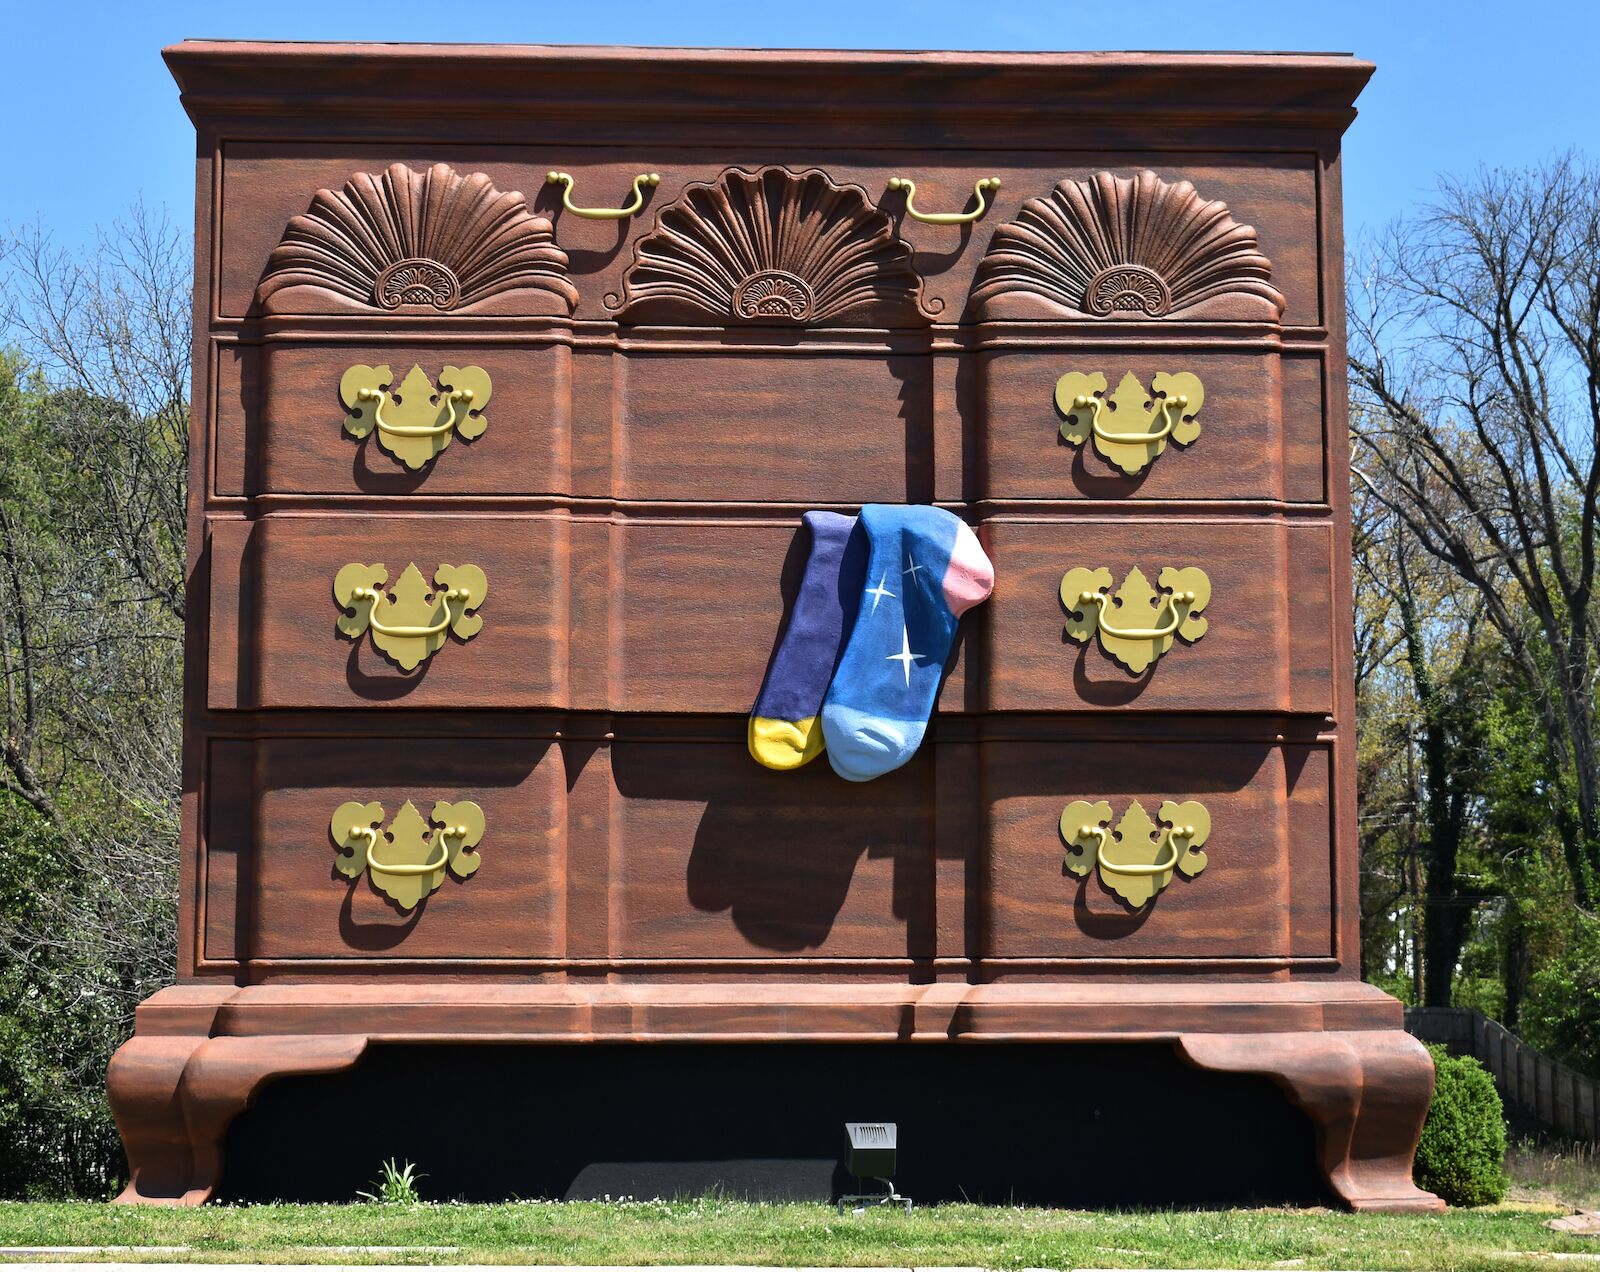 36 foot high World's Largest Chest of Drawers.